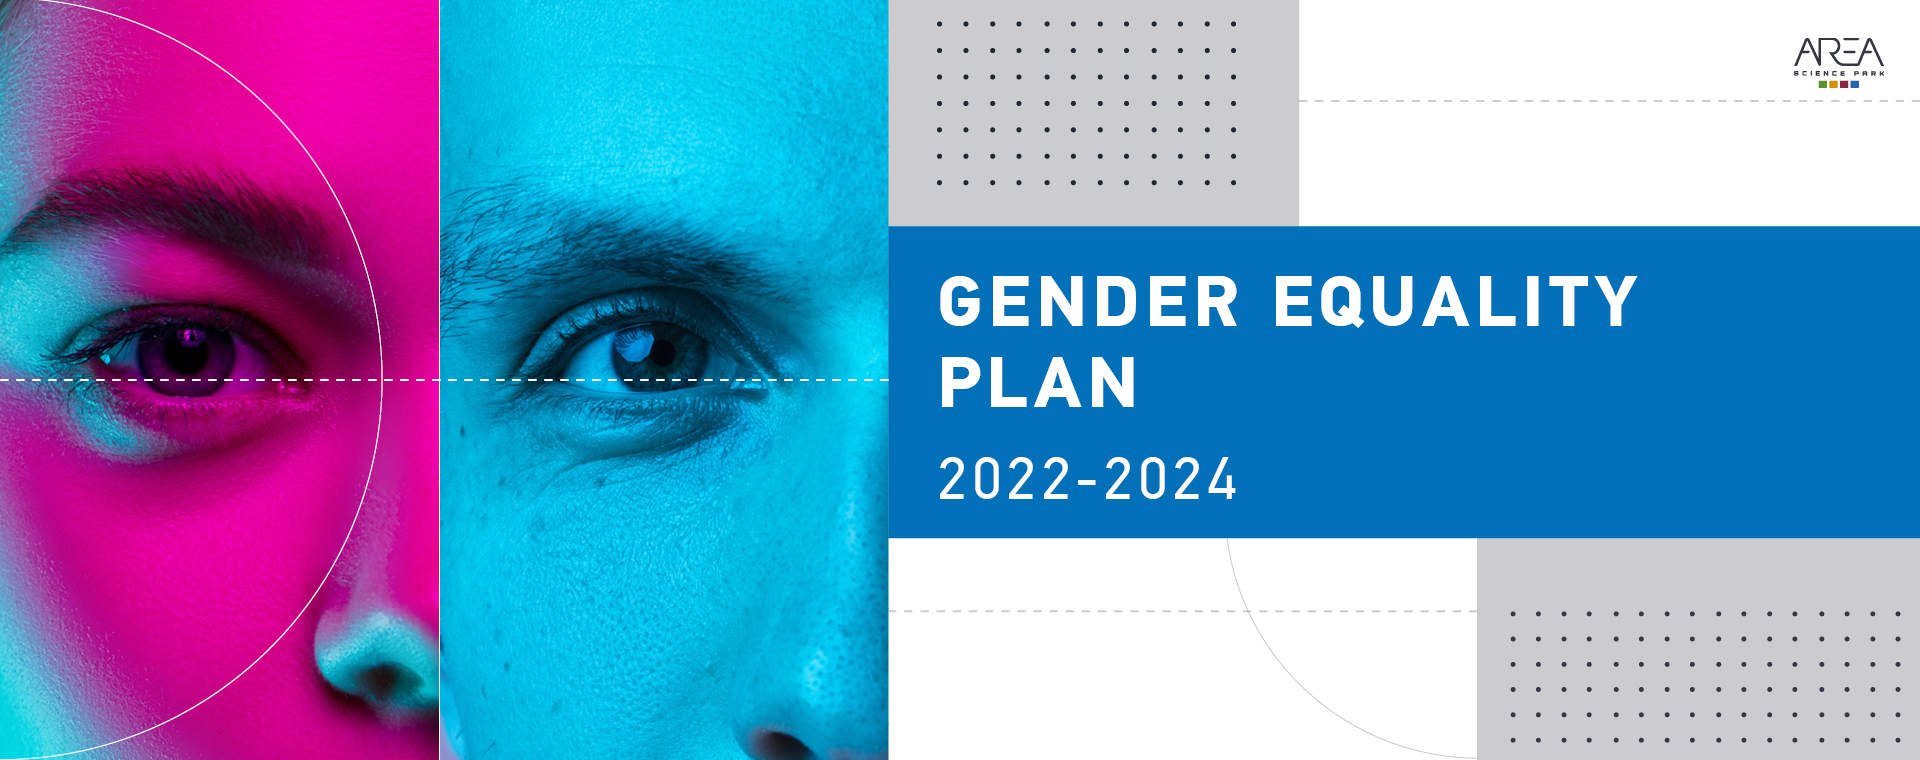 Gender equality: Area Science Park publishes new Plan to reduce the gender gap